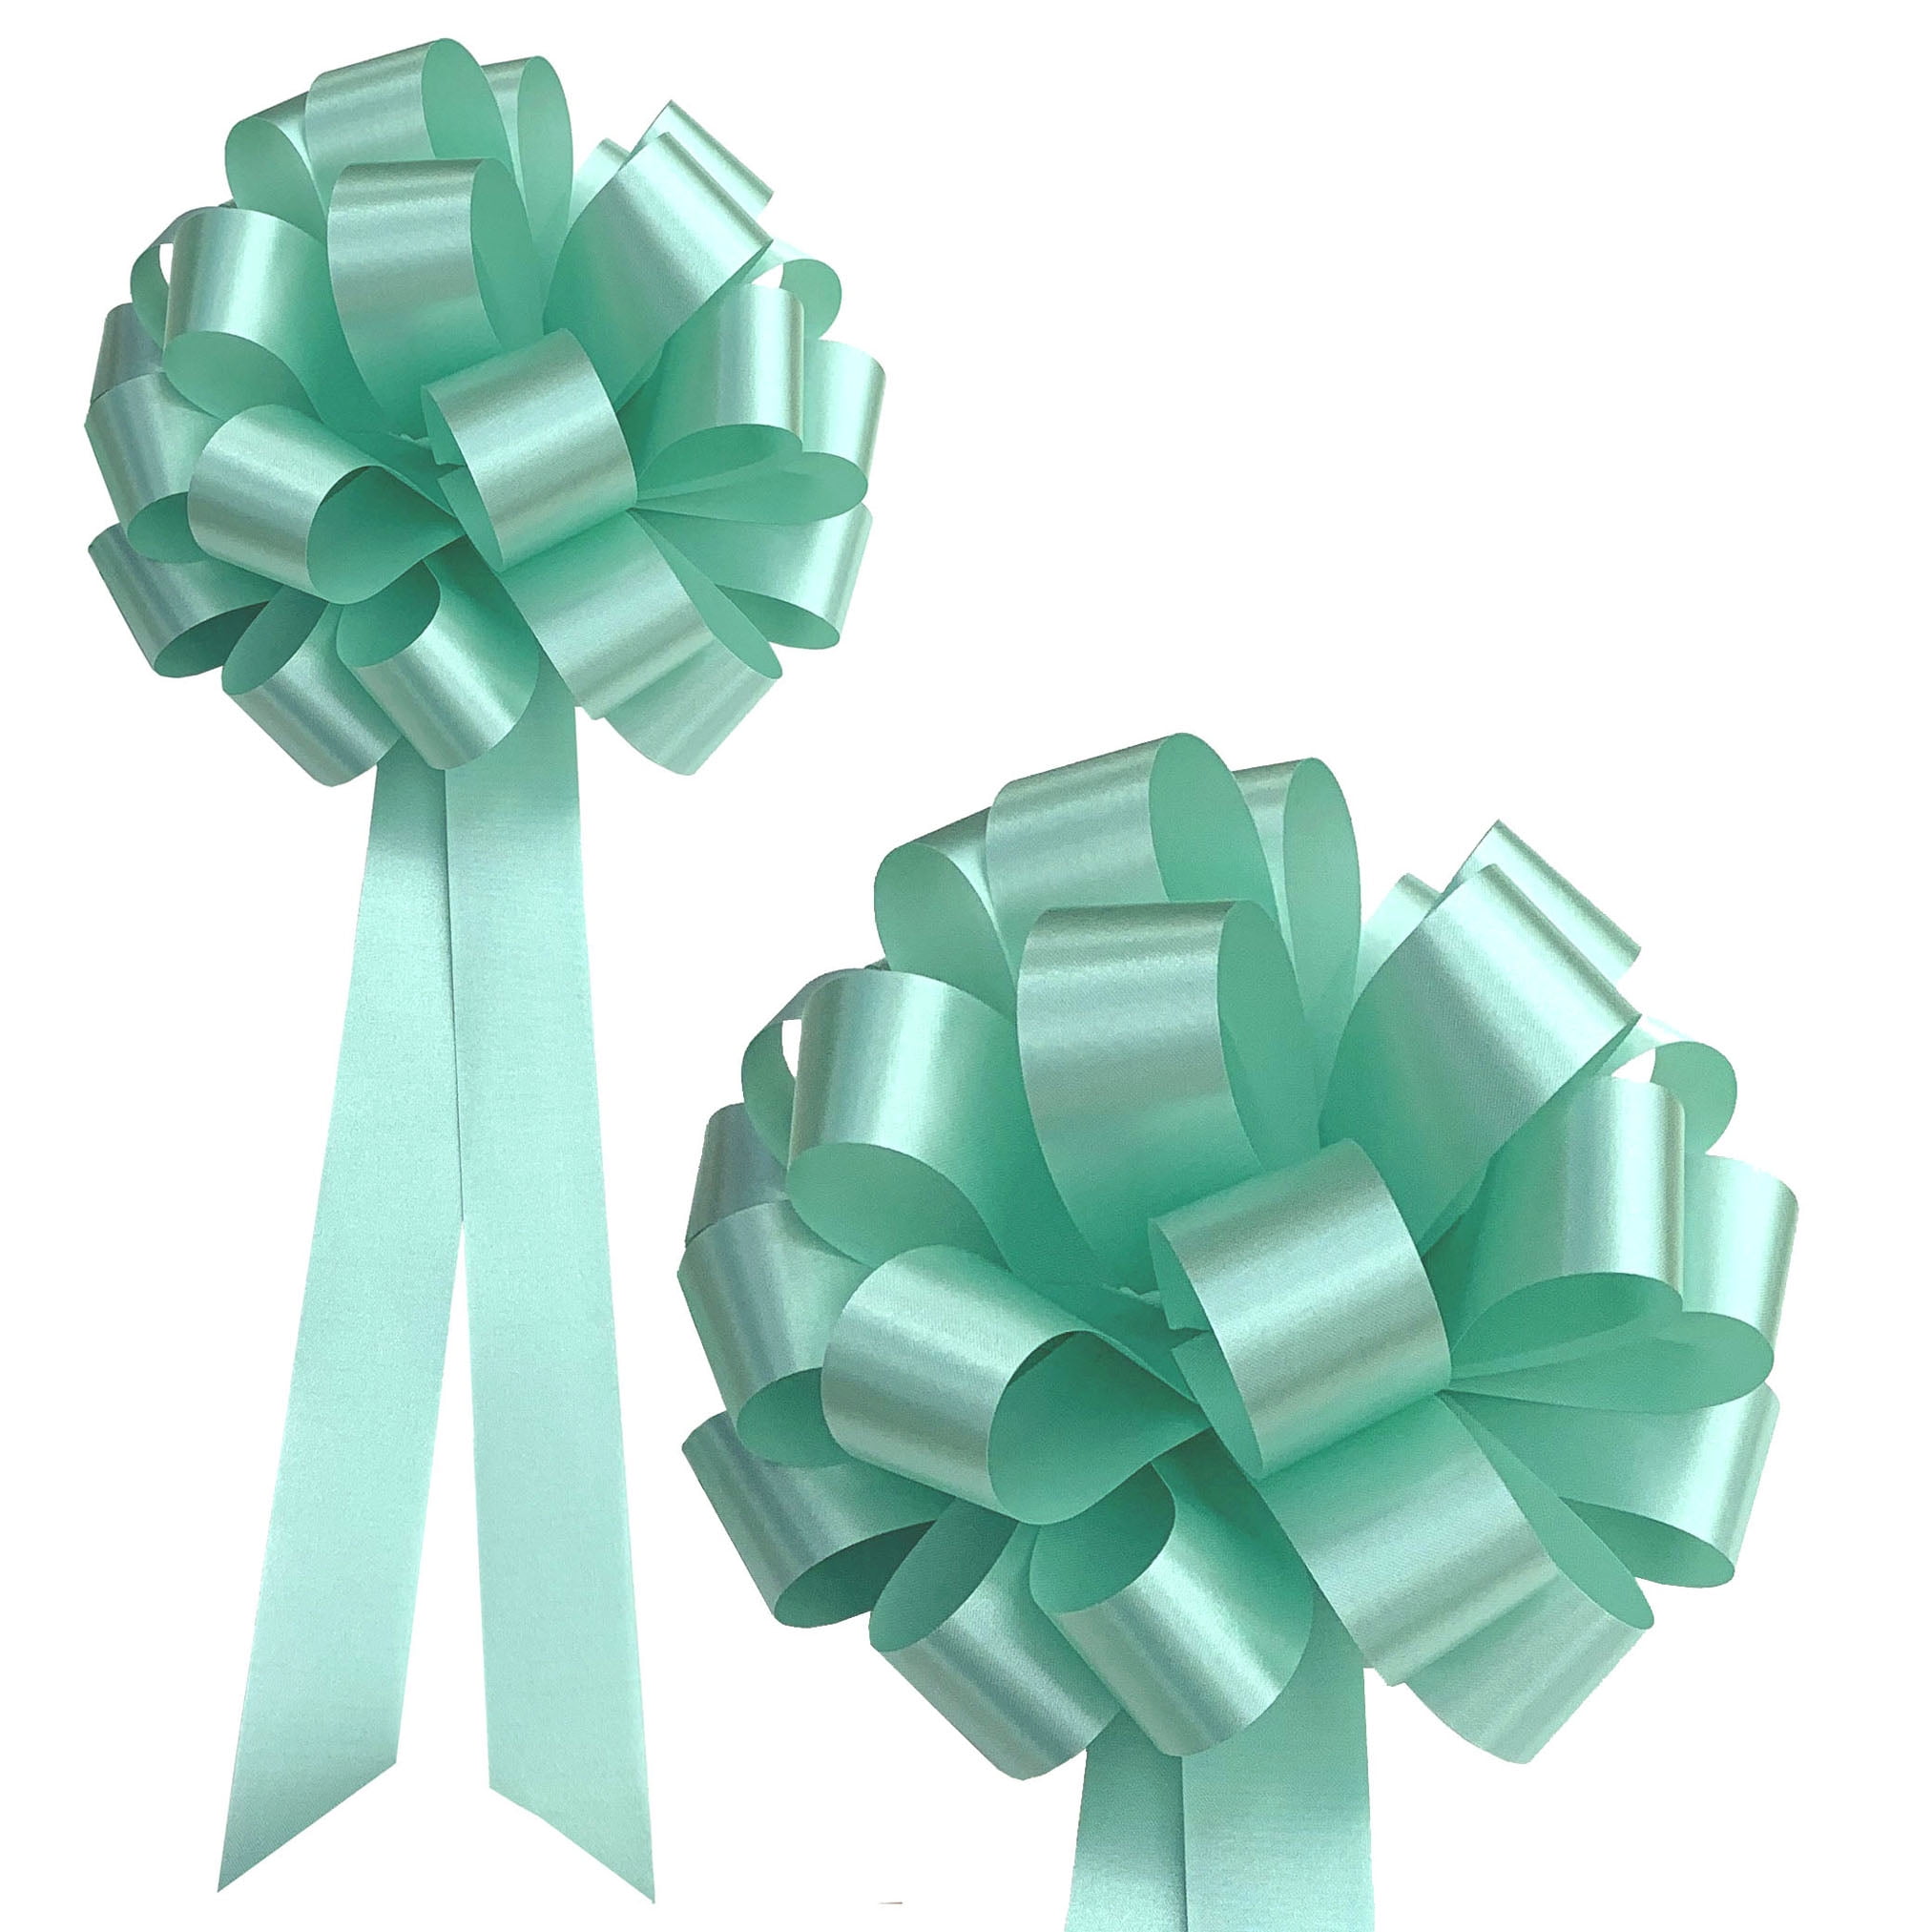  Wide Satin Ribbon Green Ribbon for Gift Wrapping,23m